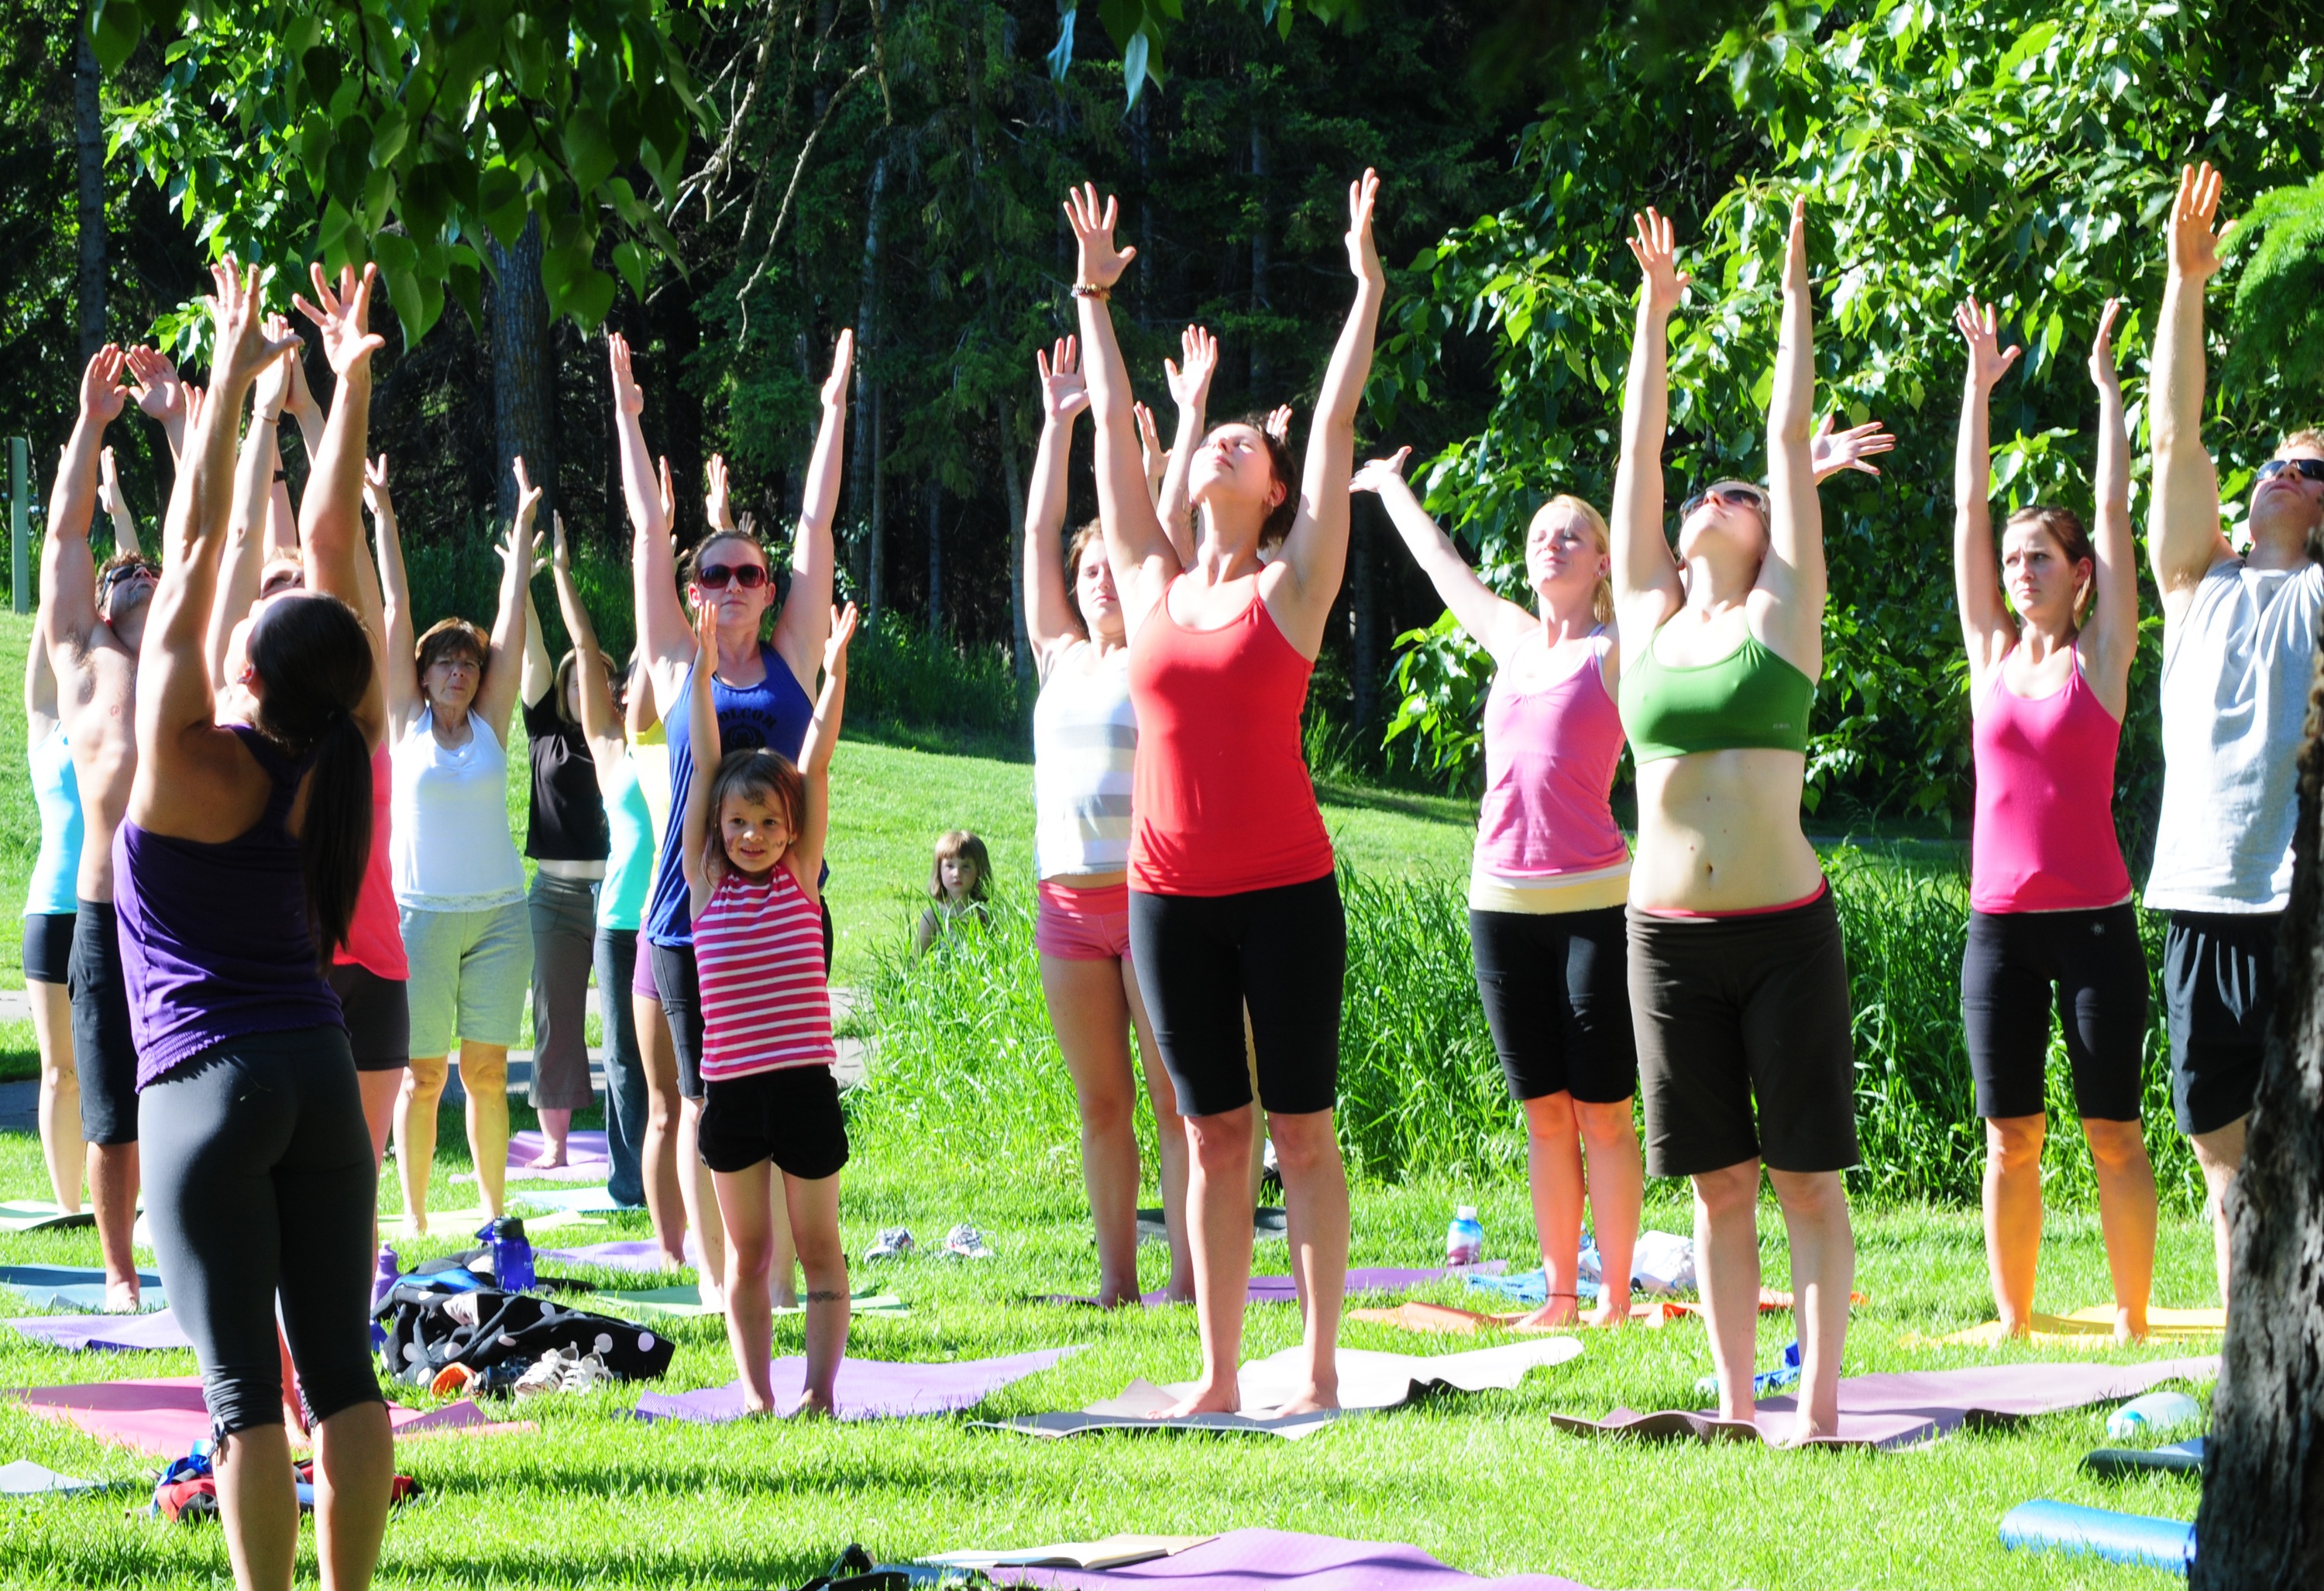 REACH- Red Deerians made their way to Kin Kanyon Park to take part in a free yoga lesson and enjoyed what little sunshine there was this past weekend.